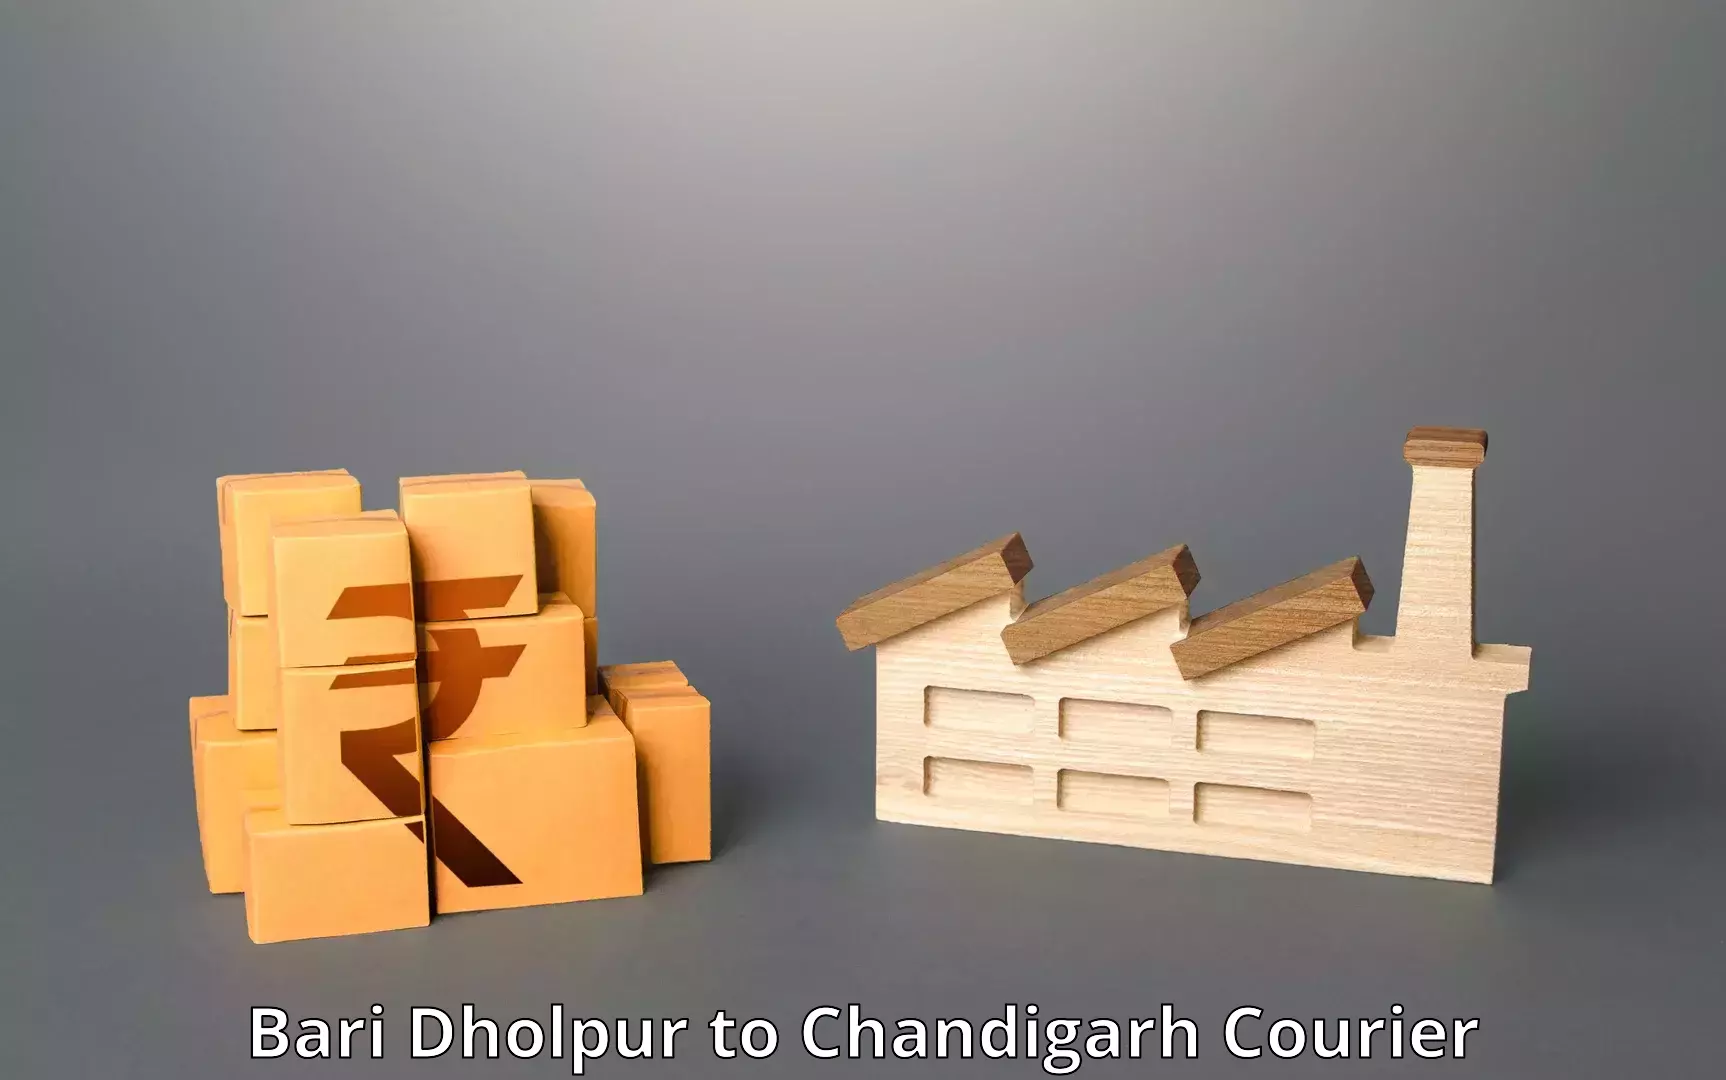 24-hour courier service Bari Dholpur to Chandigarh